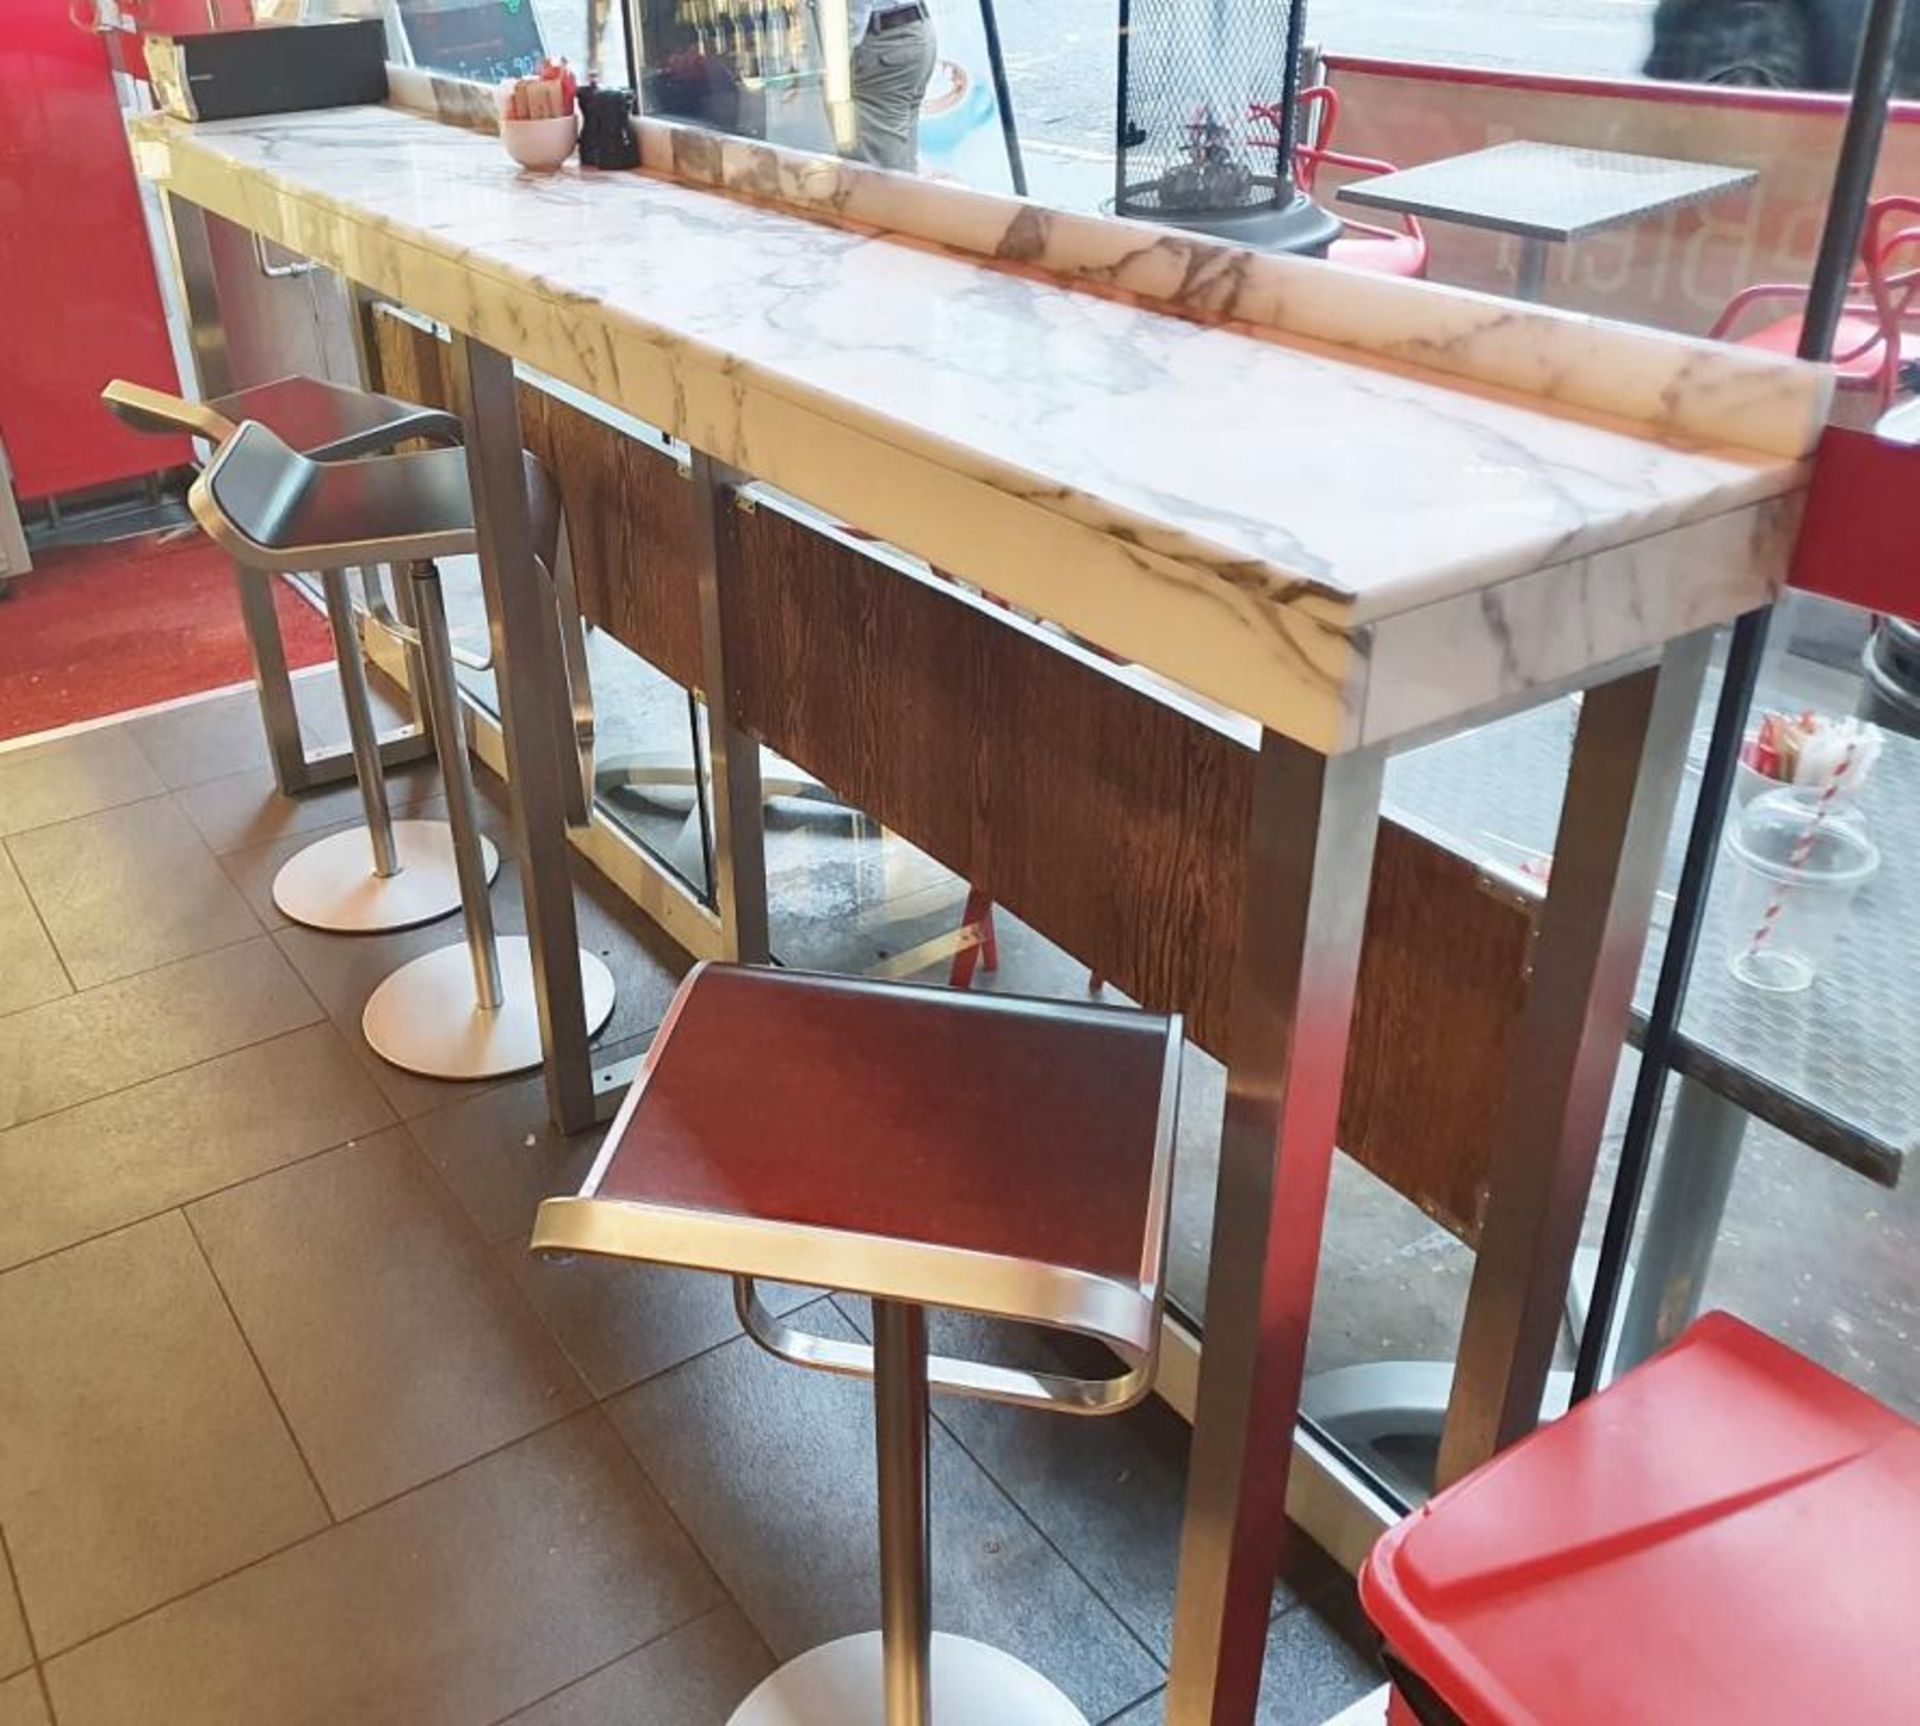 1 x White Marble/Granite Breakfast / Coffee Bar - Two Piece - From A Milan-style City Centre Cafe